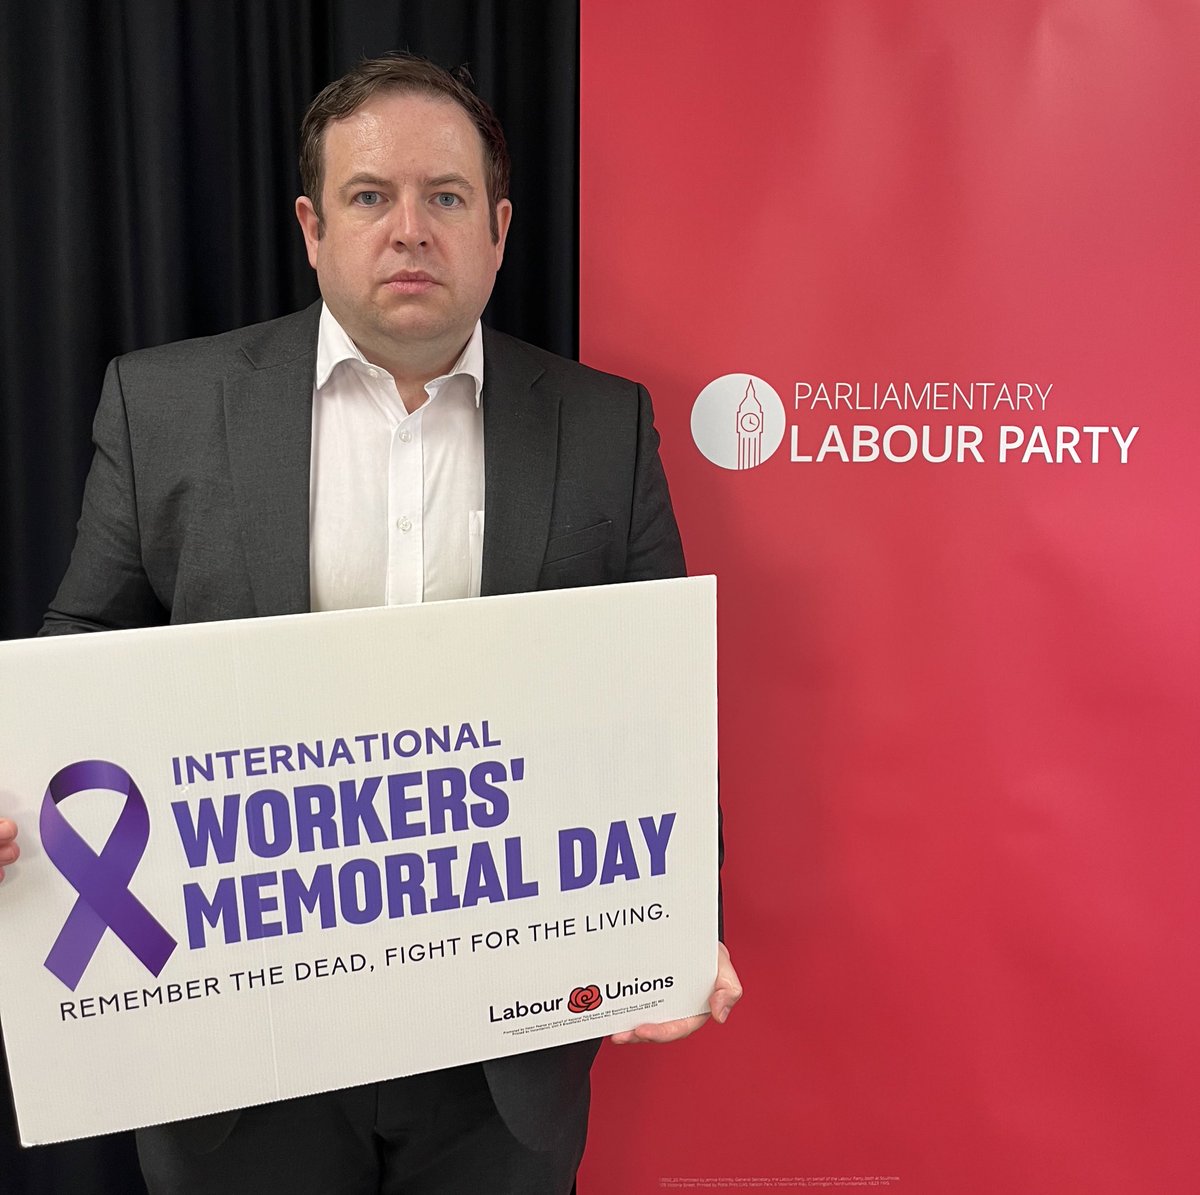 On International Workers' Memorial Day, we remember all workers lost to work-related injury or occupational illness. Organised workplaces and strong unions are the route to safer, healthier workplaces. Stay safe, join a union! tuc.org.uk/IWMD @The_TUC #IWMD2024